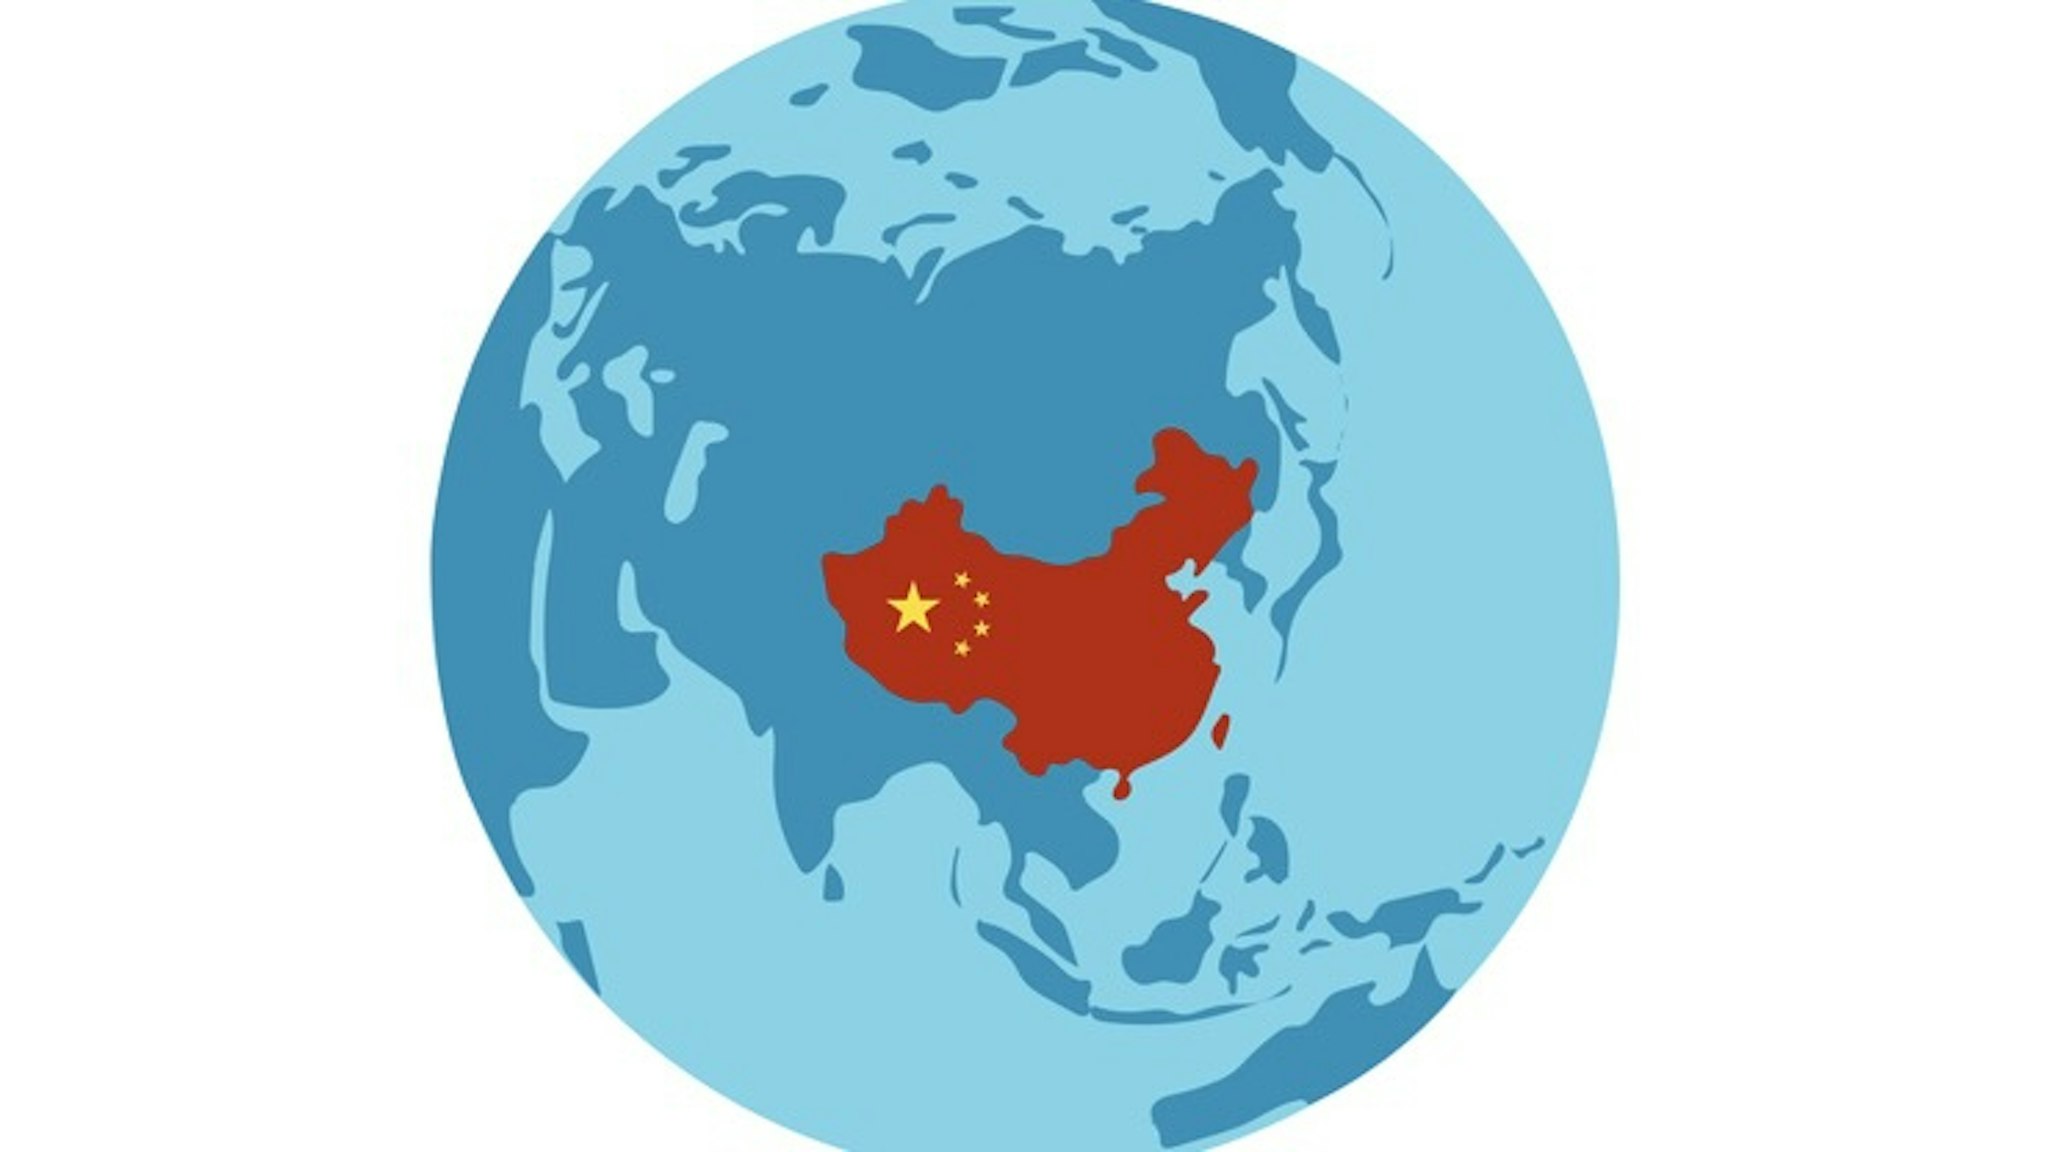 People's Republic of China country silhouette on world map. Globe view from Asia side with China highlighted in red color. Flat vector illustration. - stock vector People's Republic of China country silhouette on world map. Globe view from Asia side with China highlighted in red color. Flat vector illustration. olympuscat via Getty Images